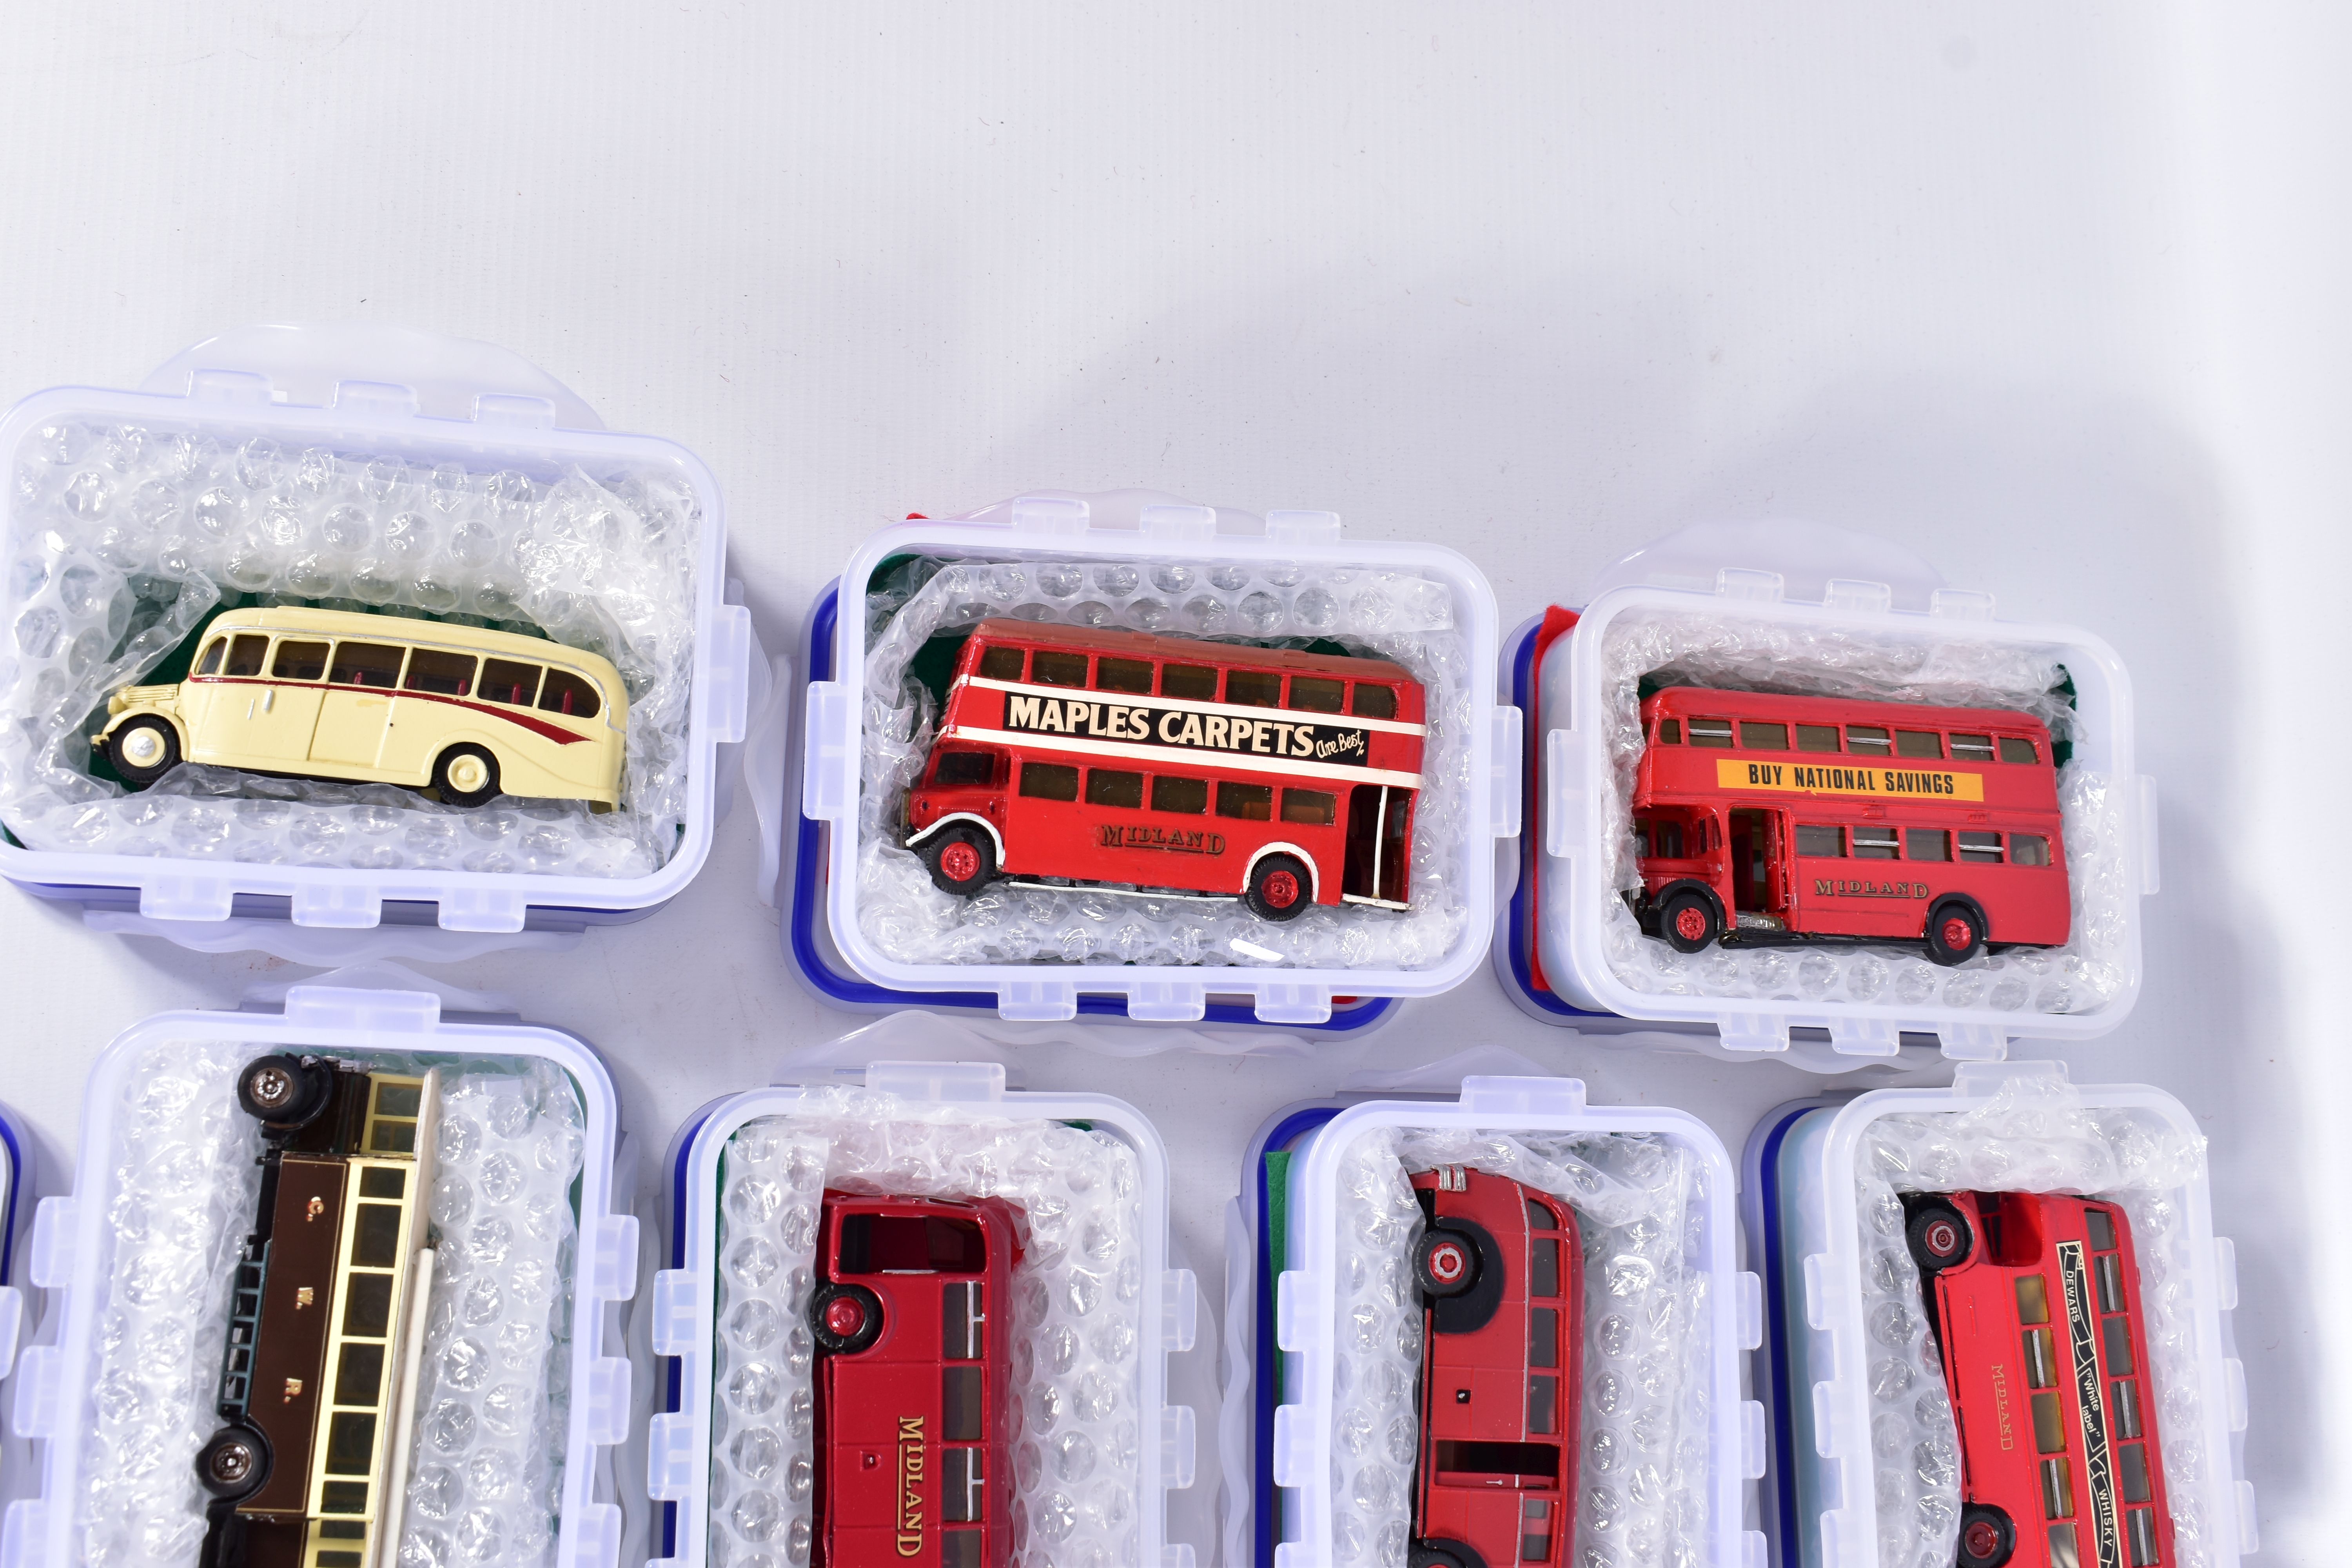 A COLLECTION OF CONSTRUCTED WHITEMETAL KIT MIDLAND RED BUS MODELS, all are 1/76 scale kit models and - Image 10 of 11